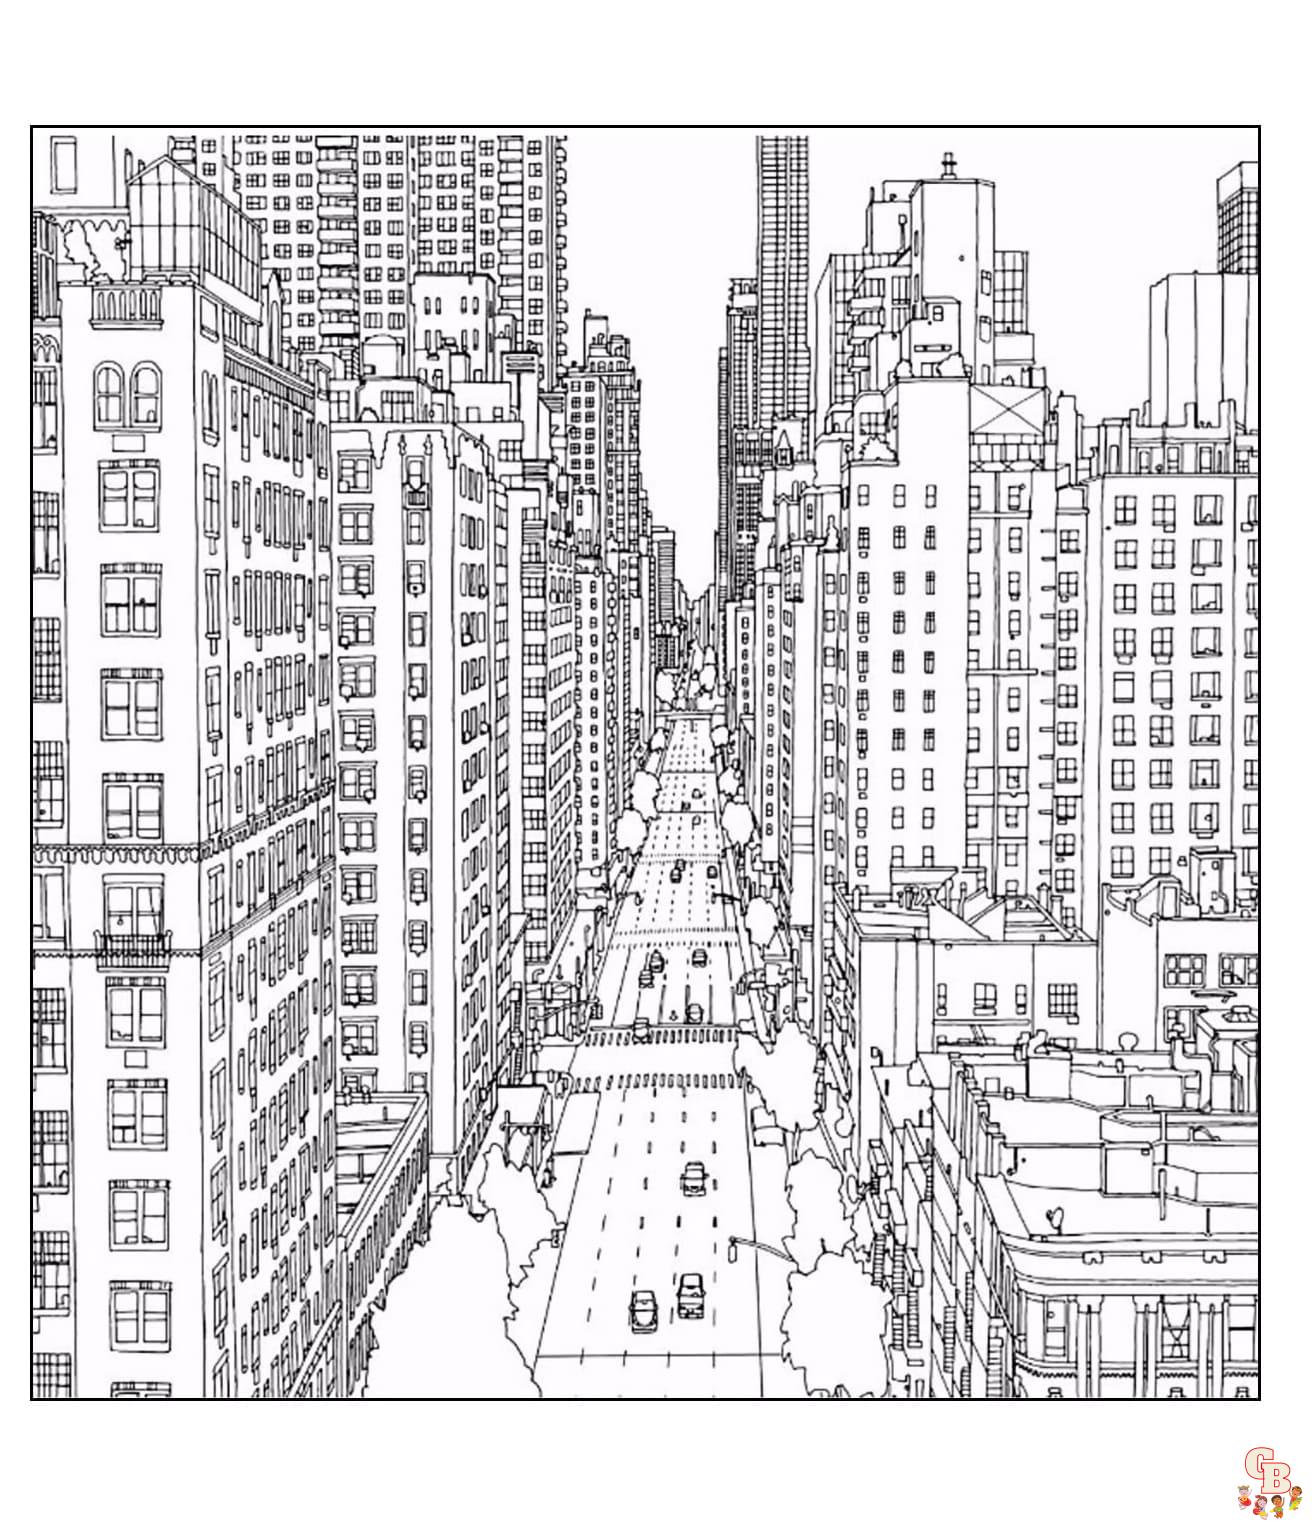 Printable new york coloring pages free for kids and adults